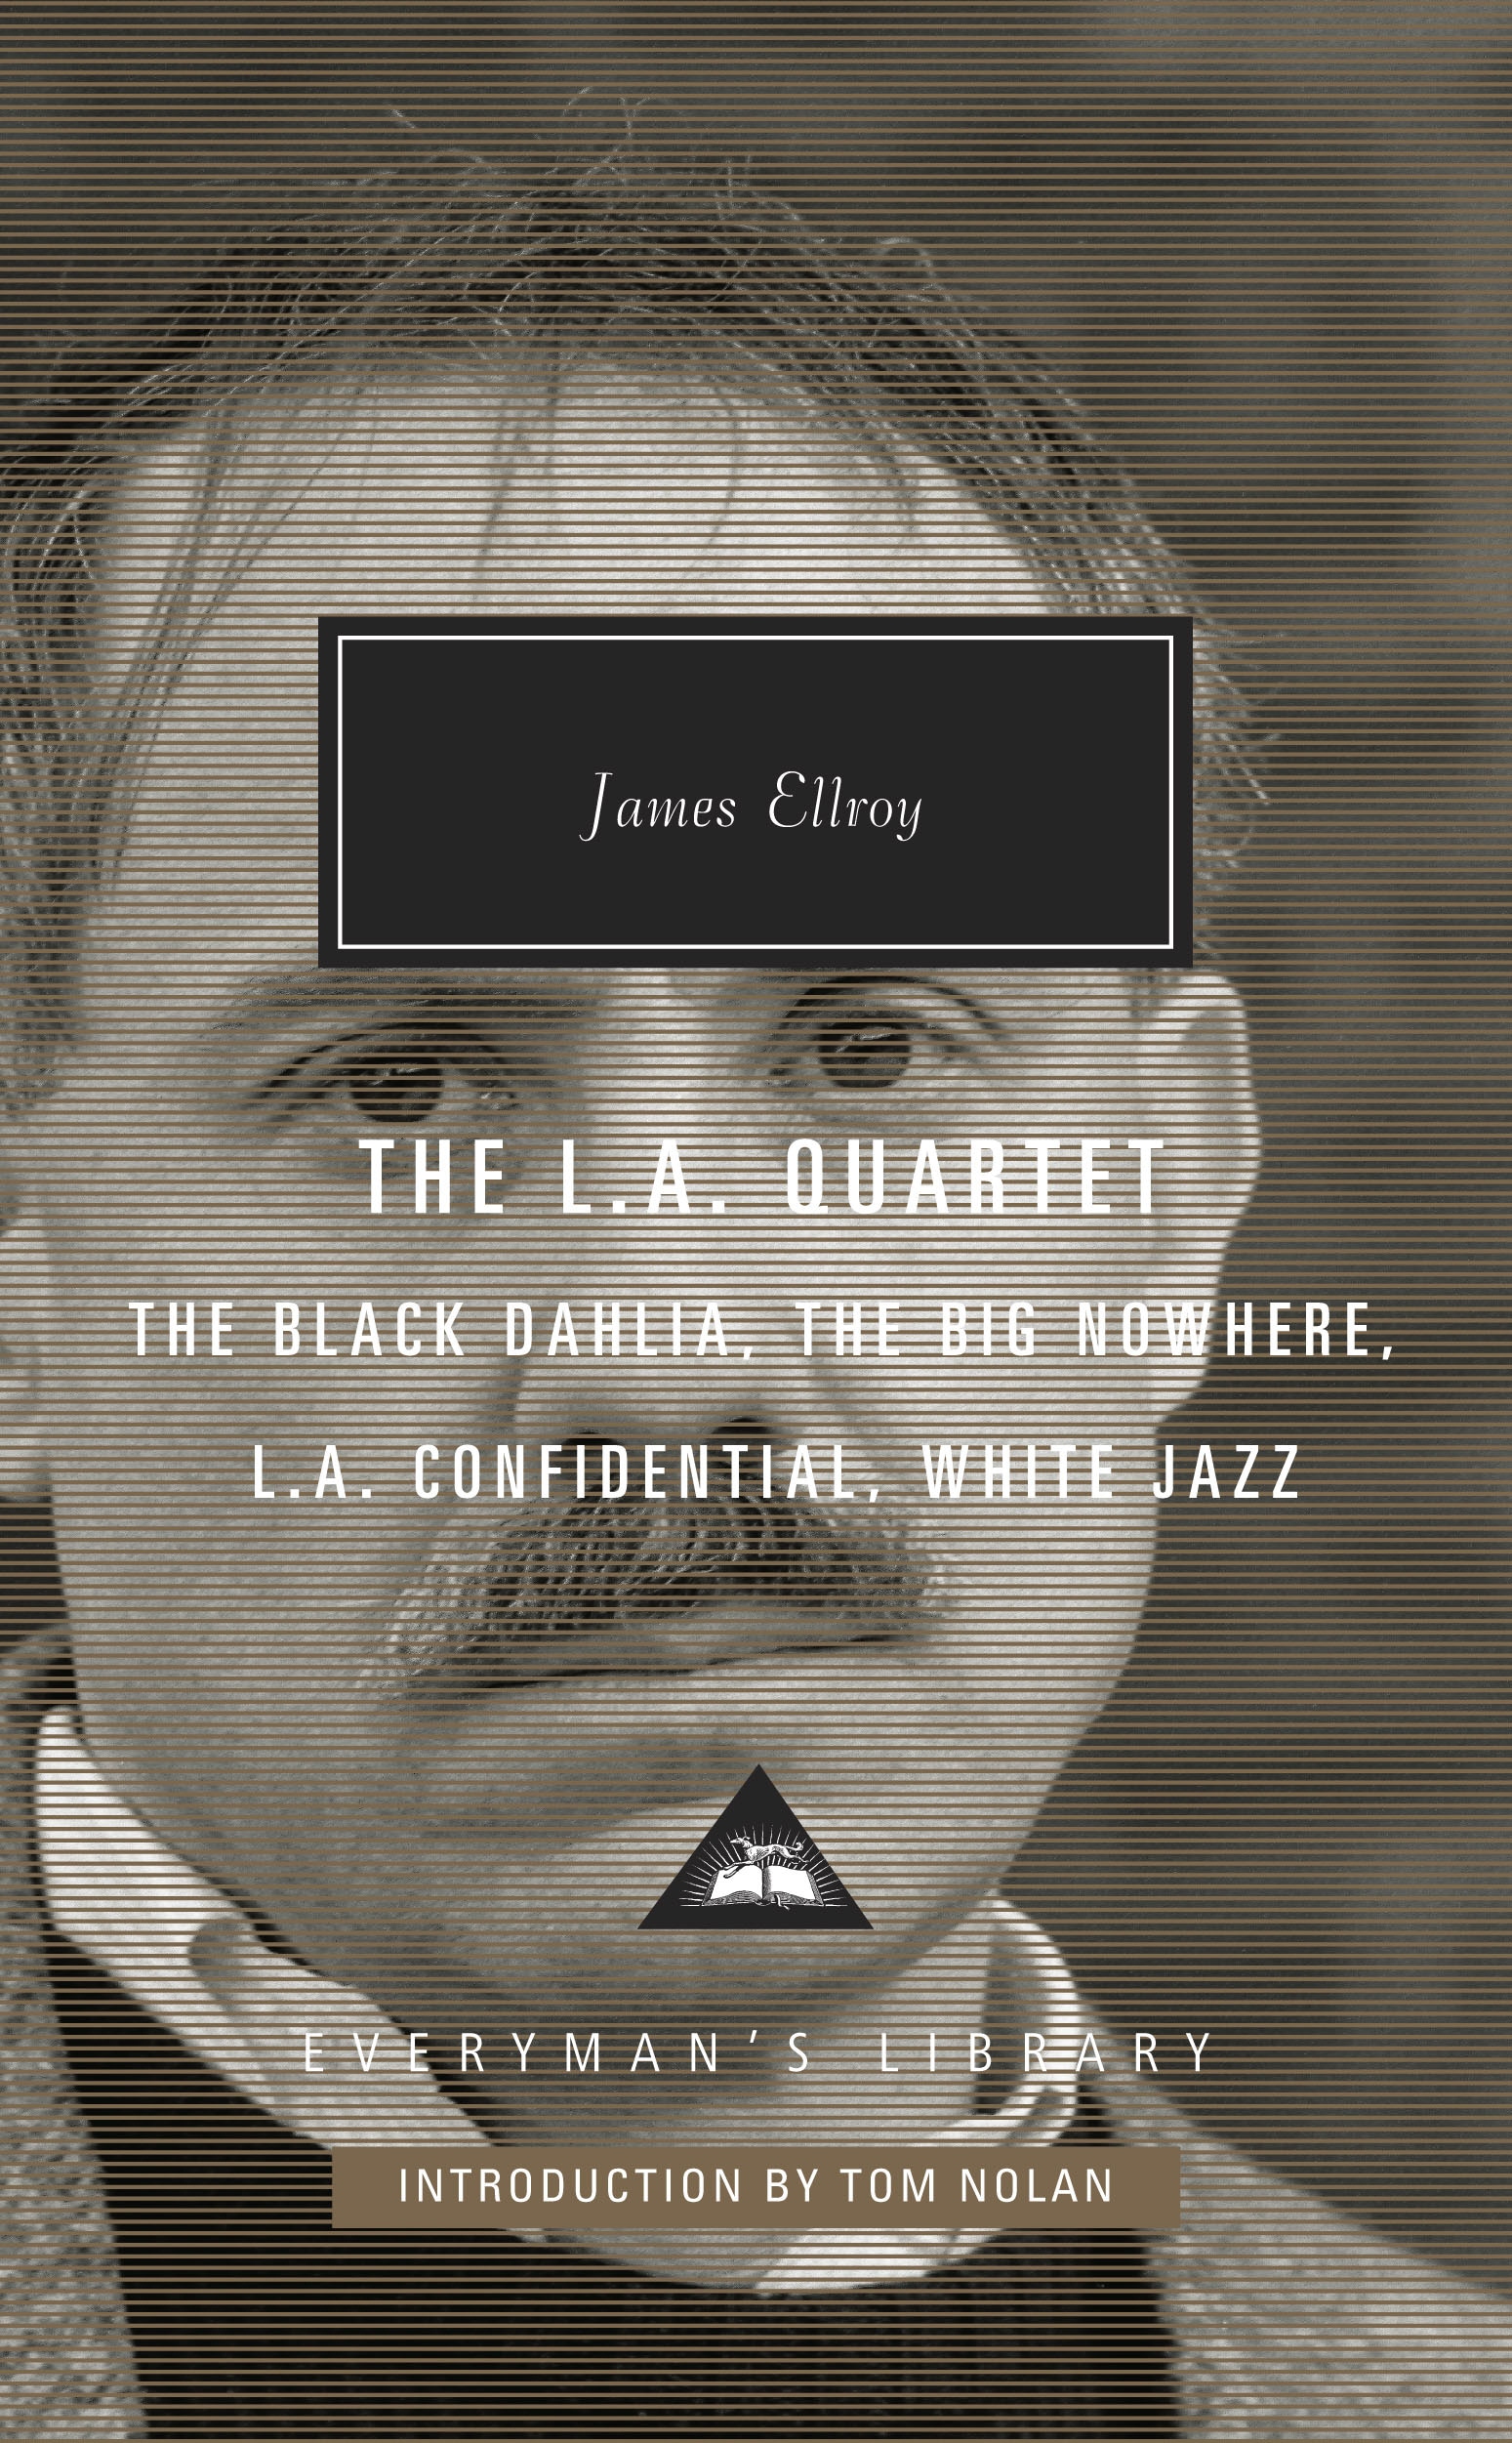 Book “The L.A. Quartet” by James Ellroy — May 2, 2019